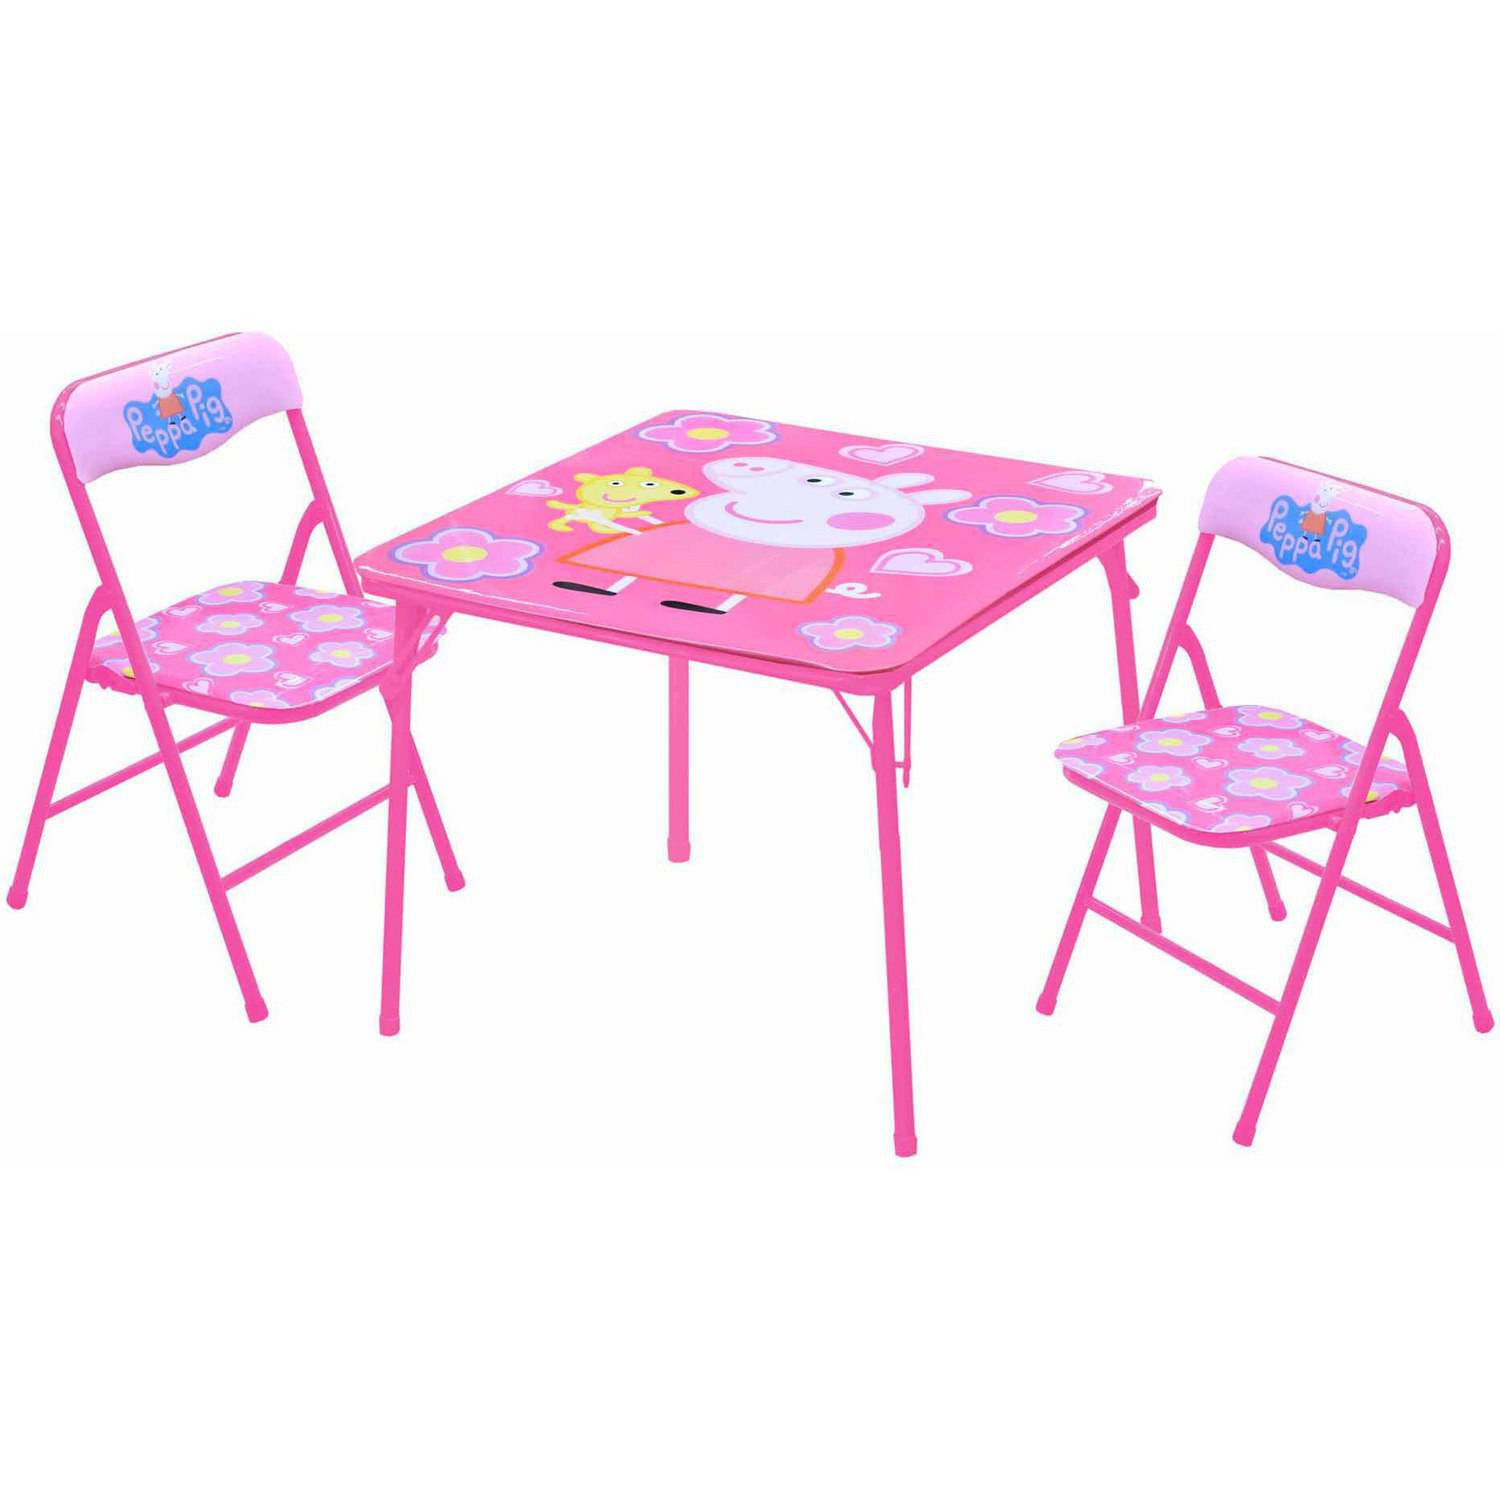 Kids Table And Chairs Walmart
 Peppa Pig Table and Chairs Set Walmart